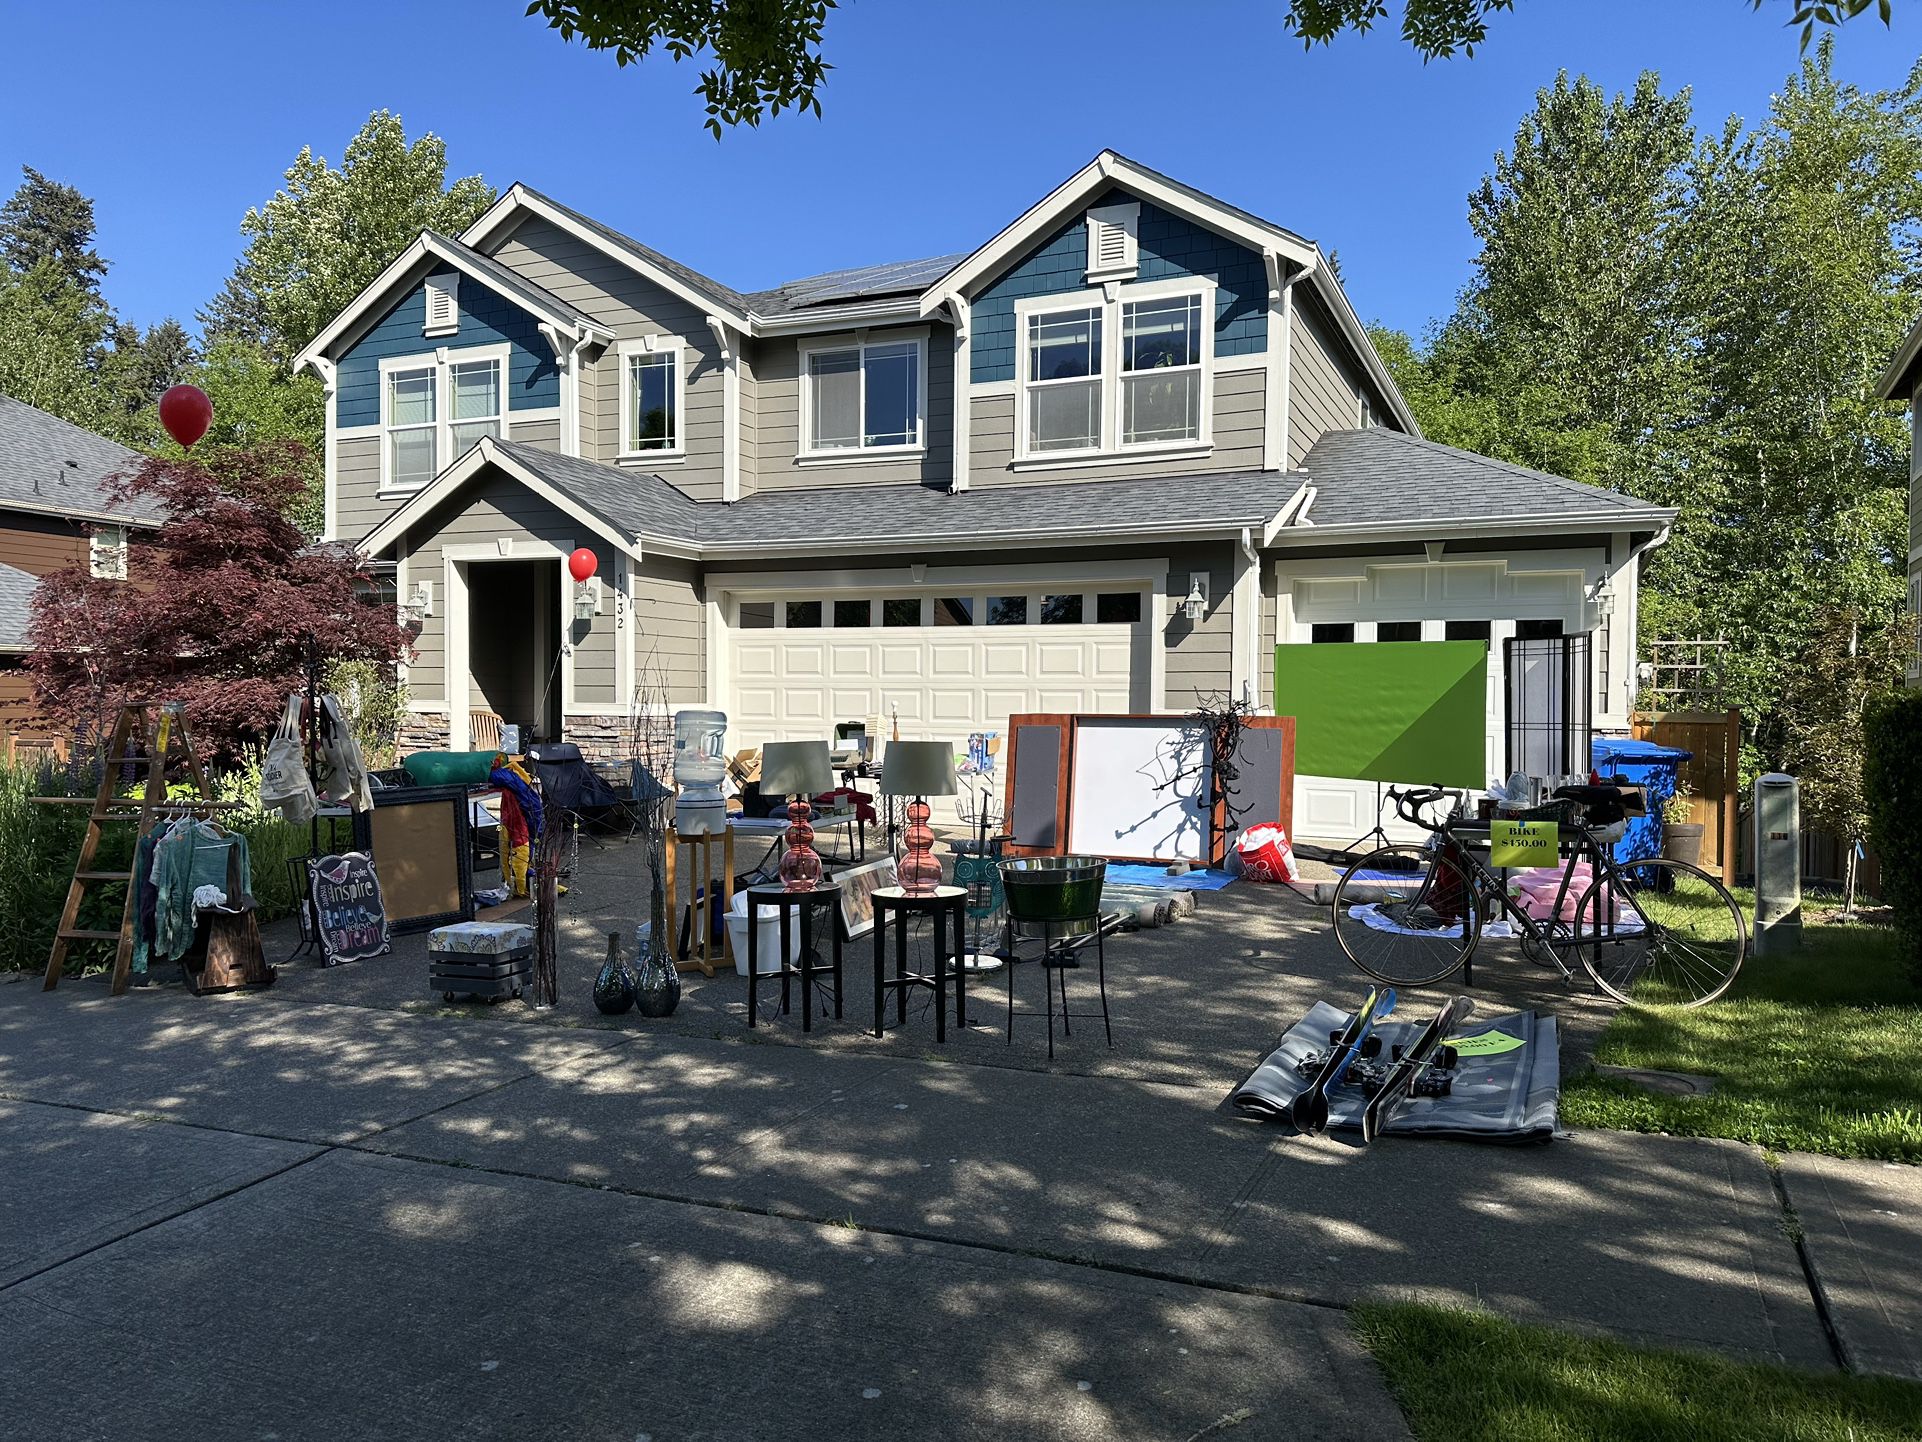 Garage Sale 9-3 TODAY ONLY!